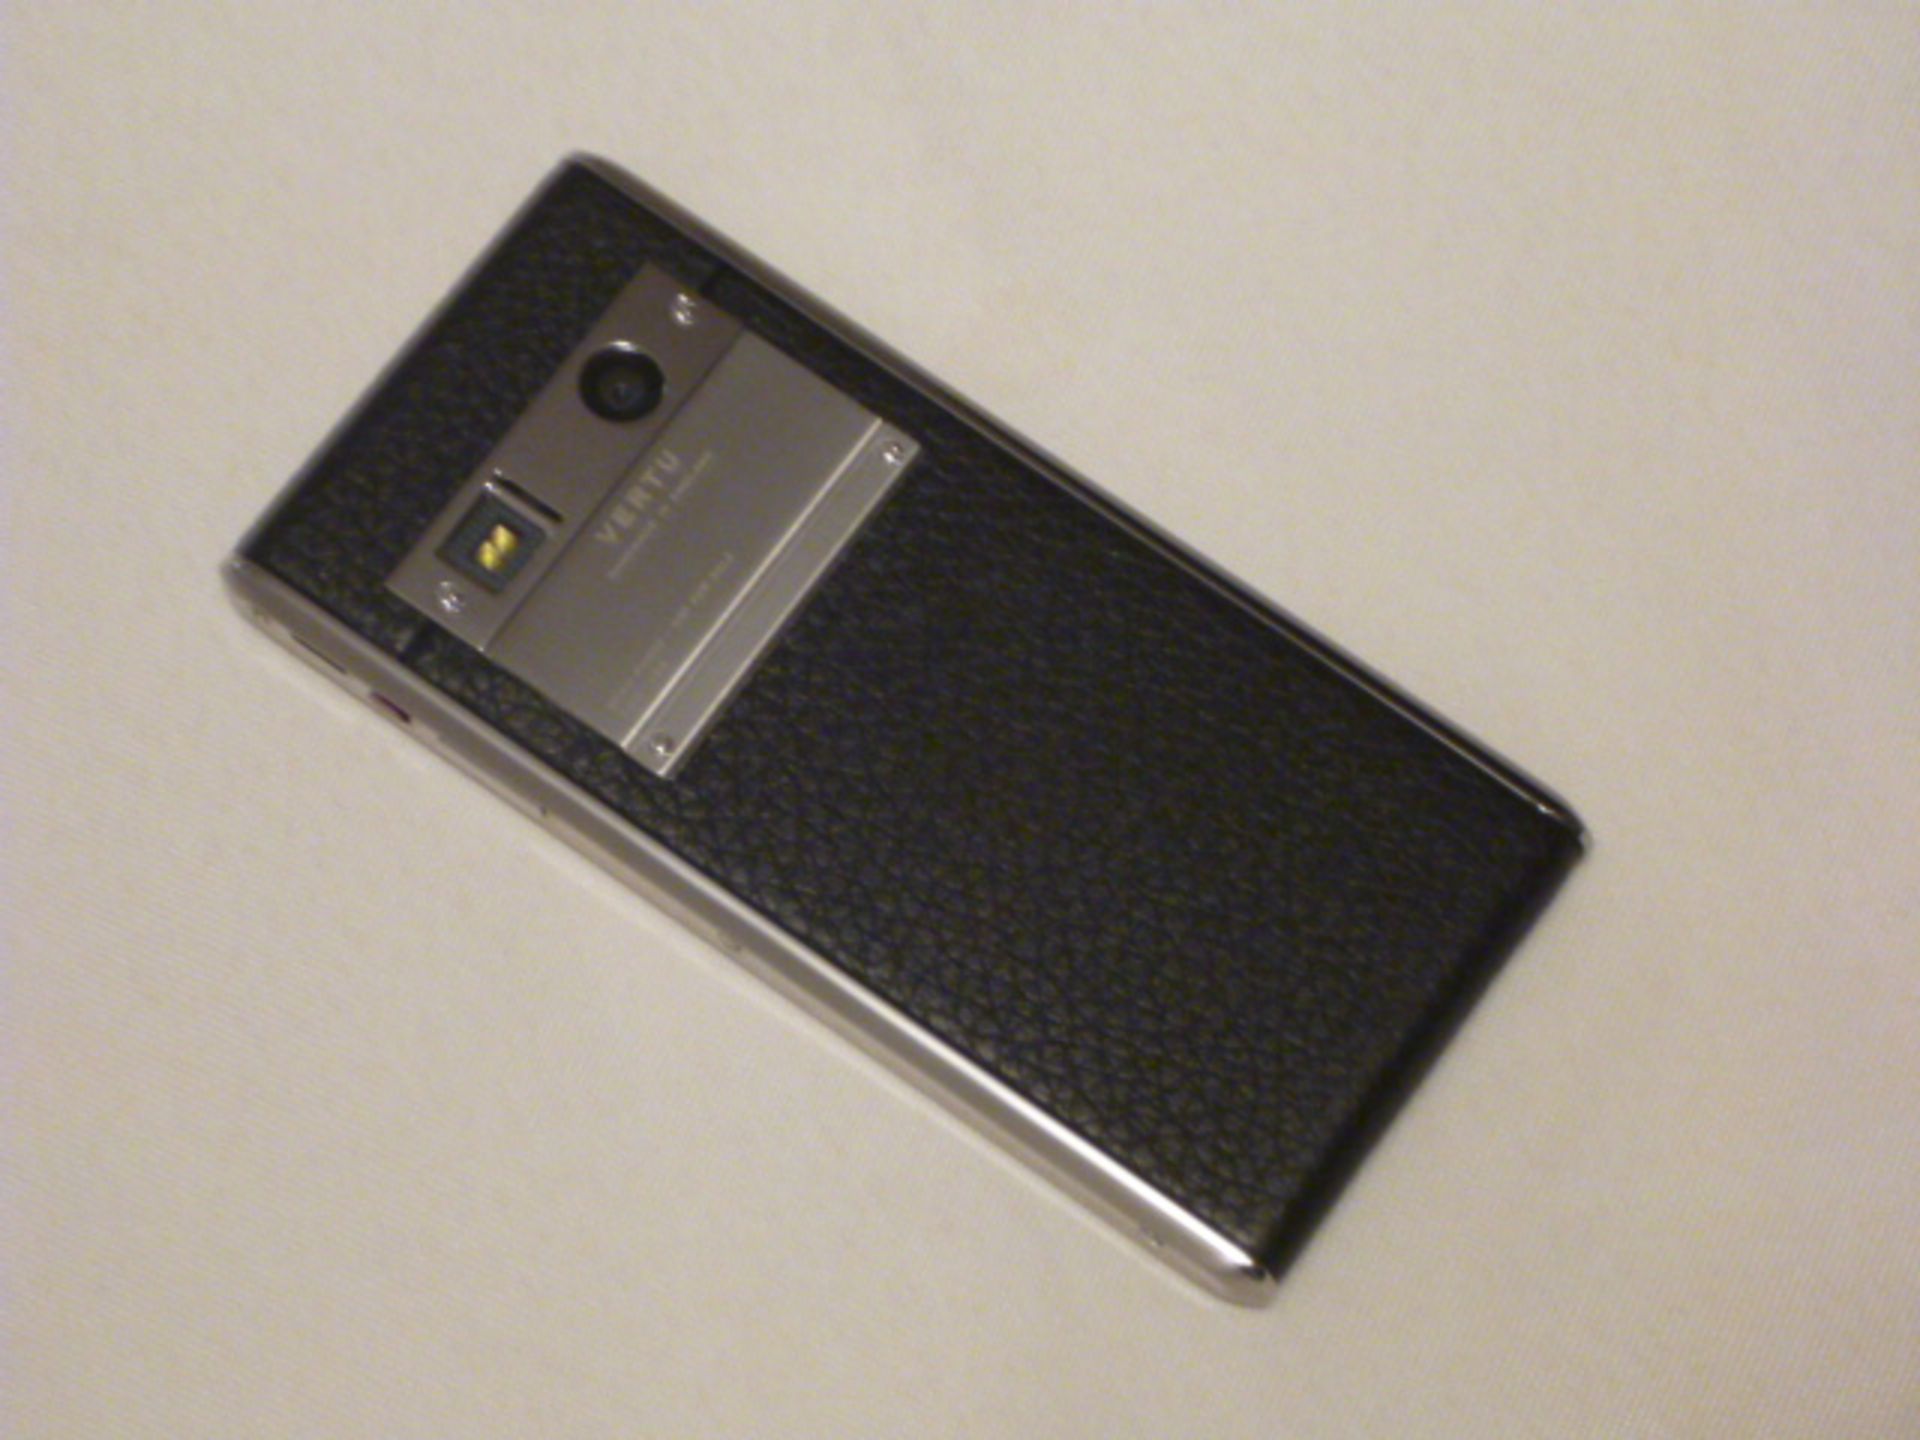 Vertu Aster Touch Phone, Black Leather. Demonstrator, S/N I-001099. Comes with Matching Leather - Image 2 of 3